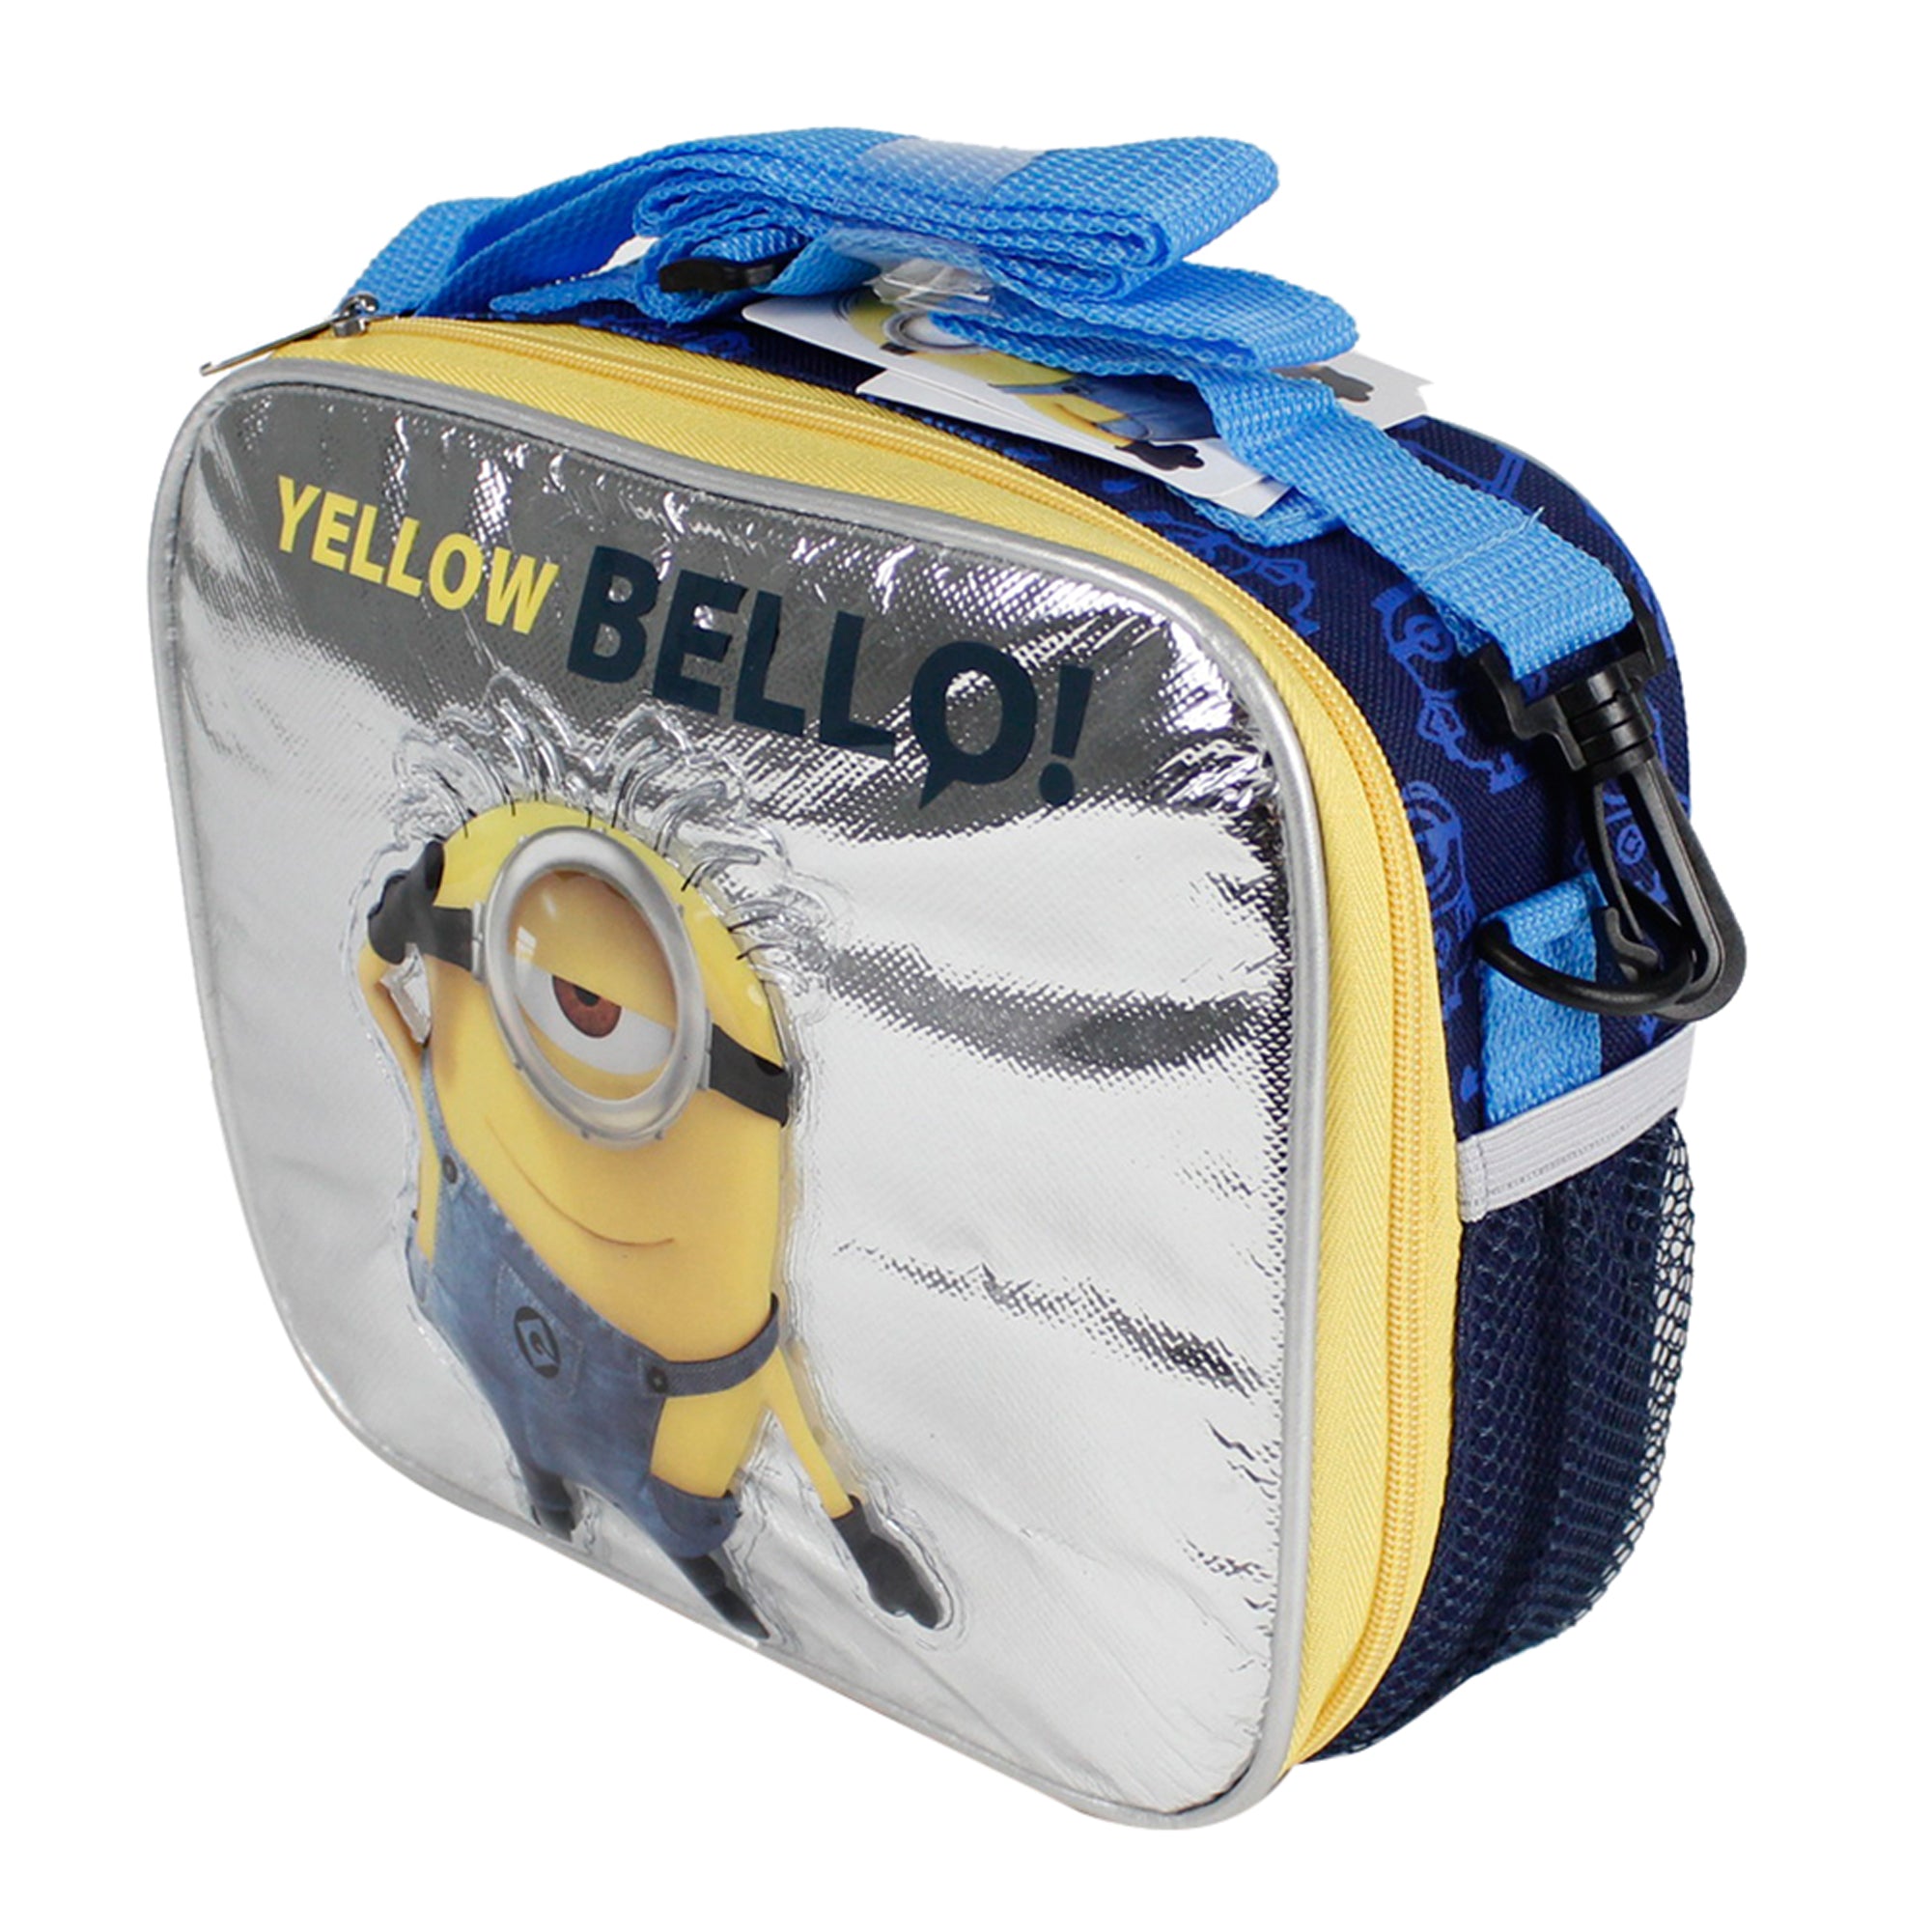 Licensed Despicable Me Minions Insulated Kids Lunch box Bag Food container  Pail